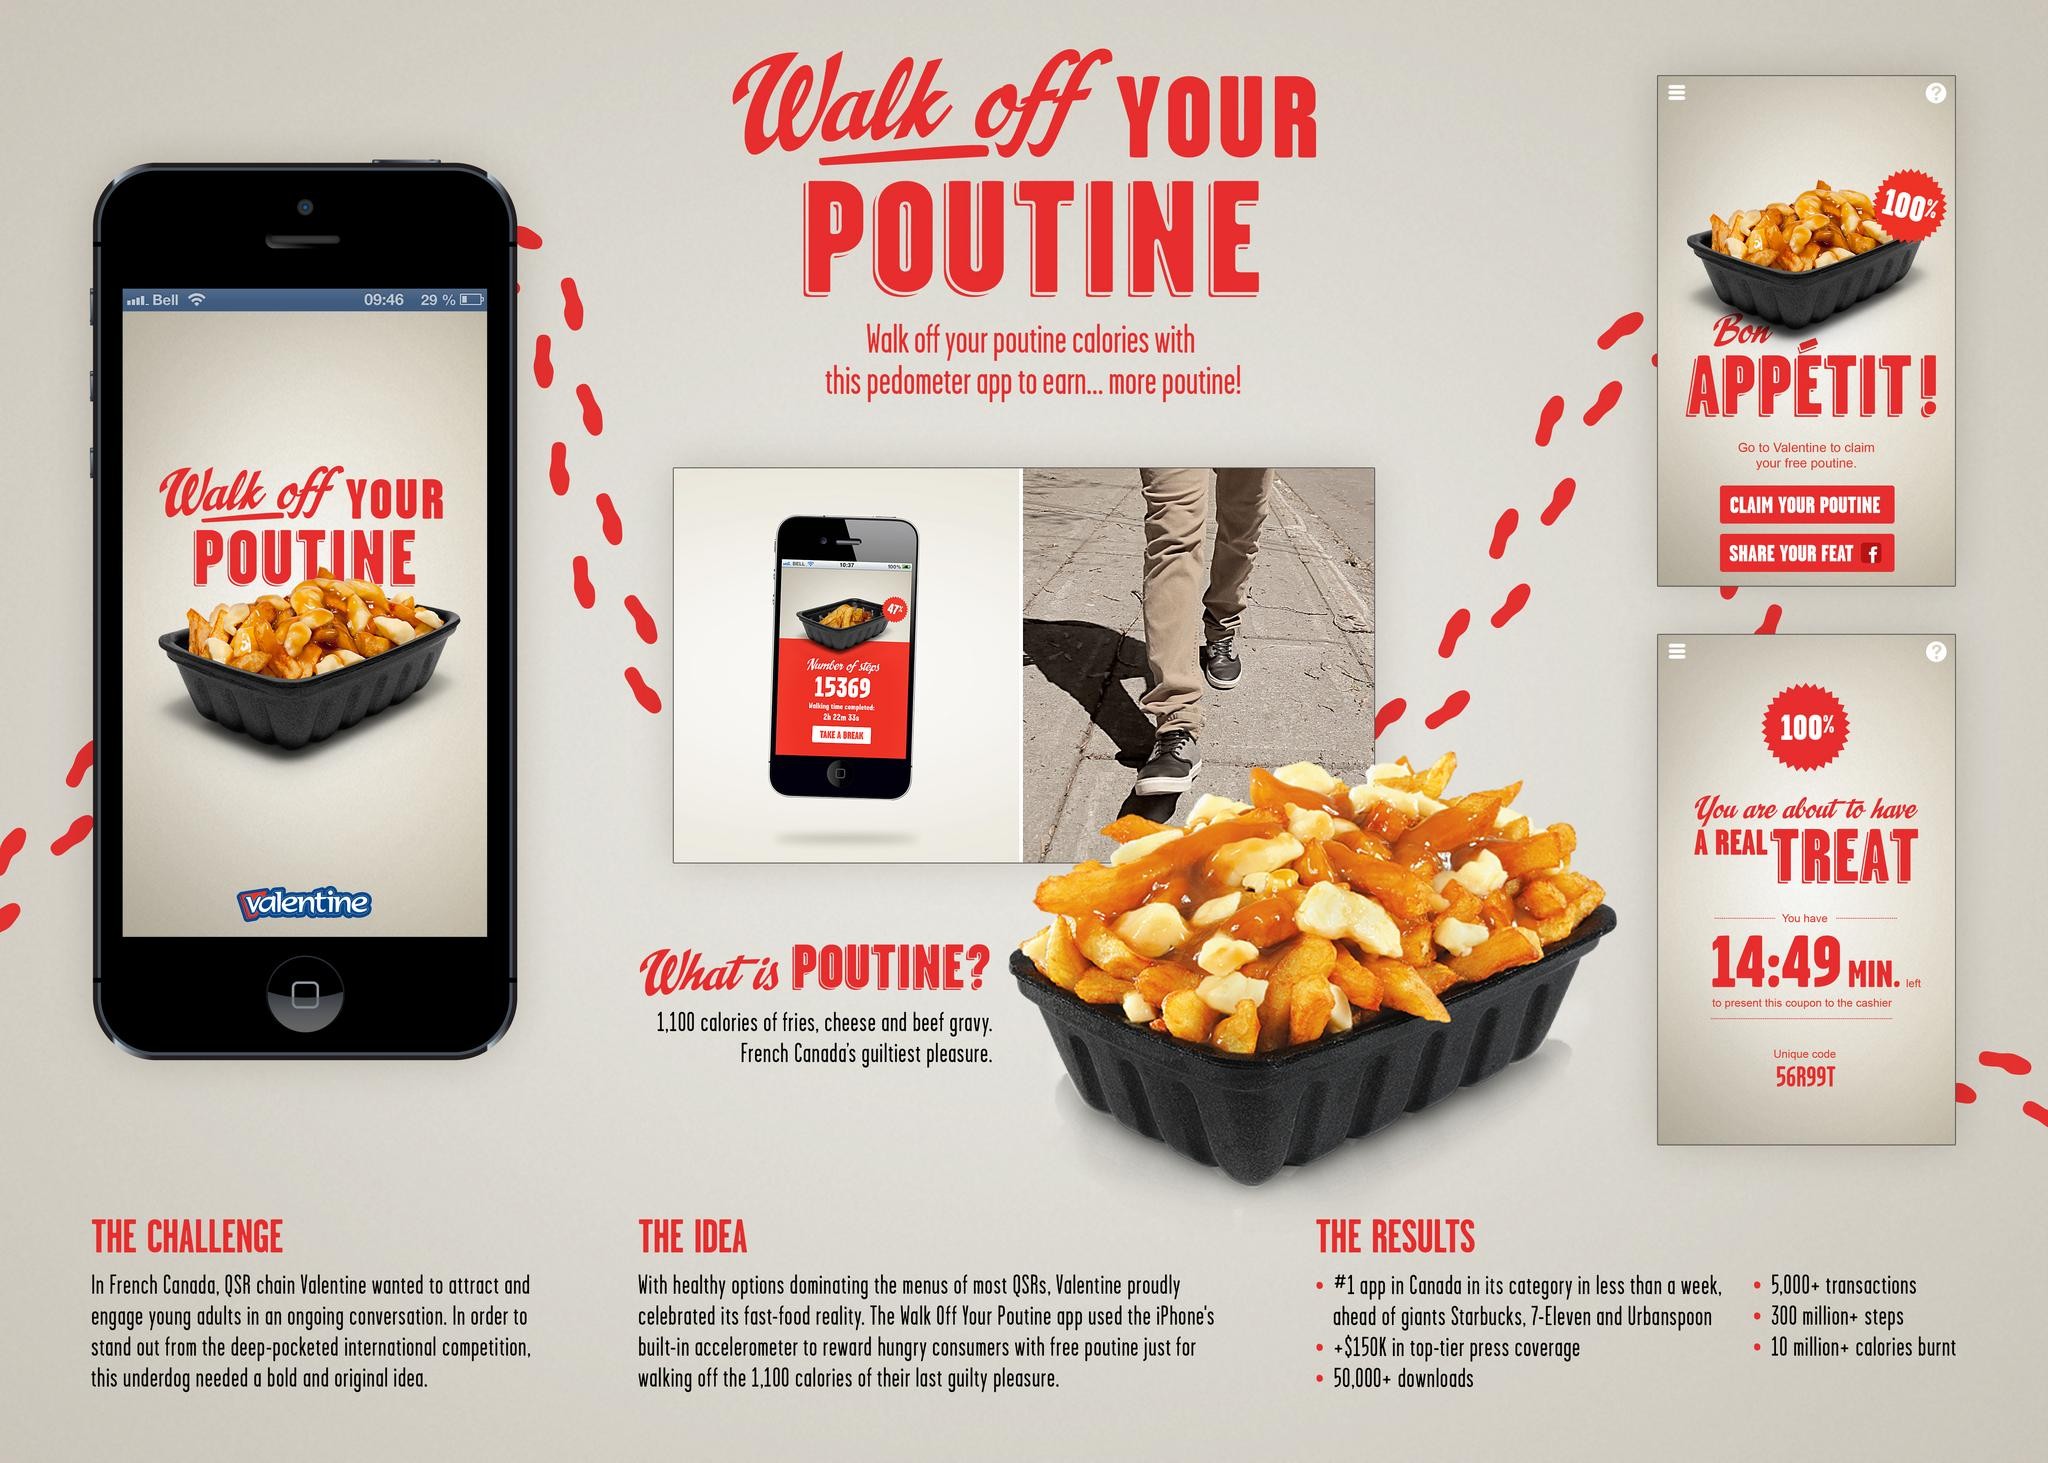 WALK OFF YOUR POUTINE